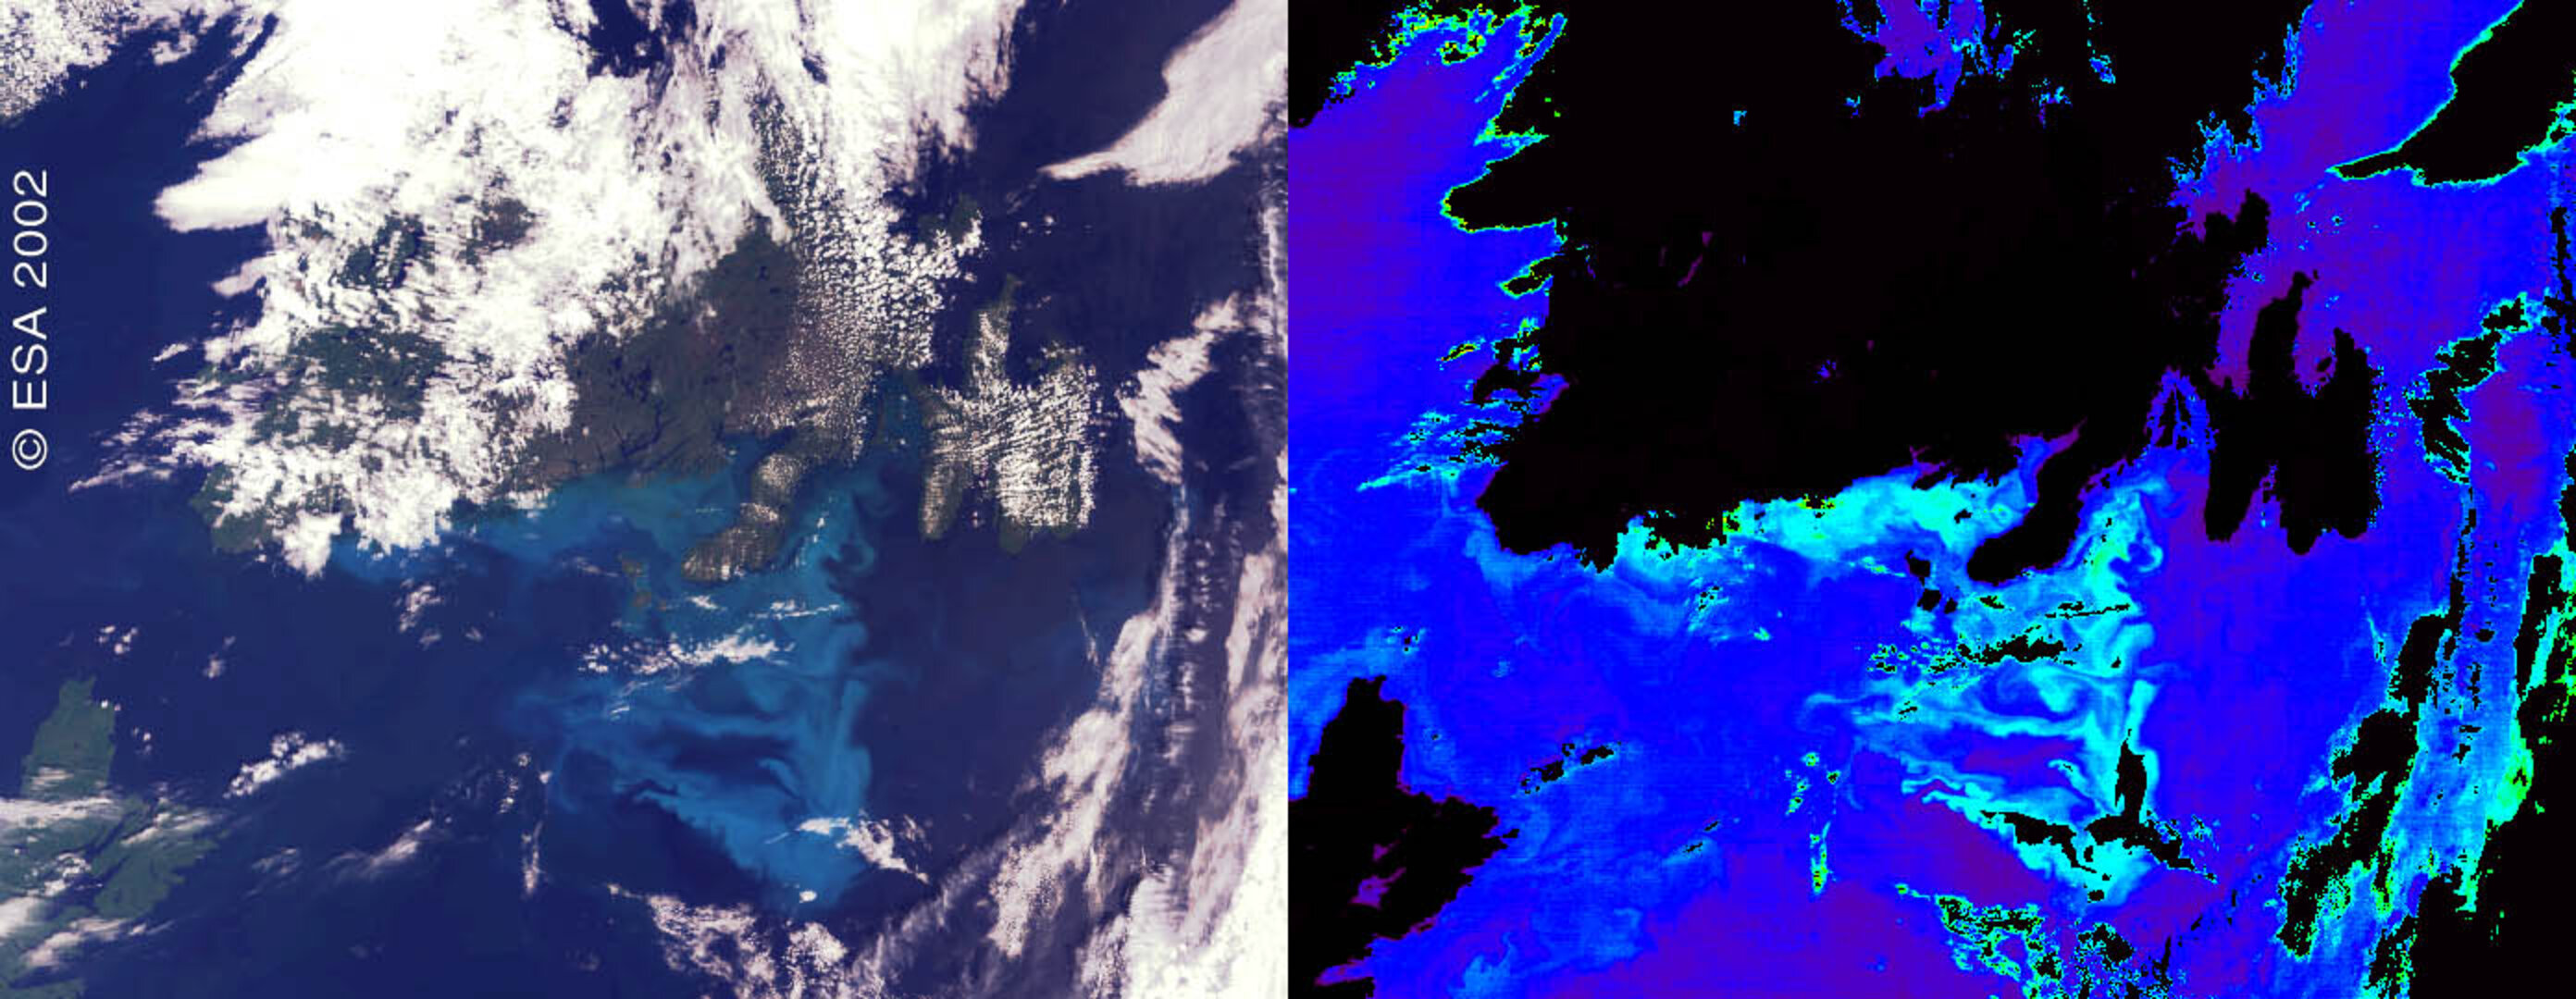 Two contrasting views of the Canadian phytoplankton bloom